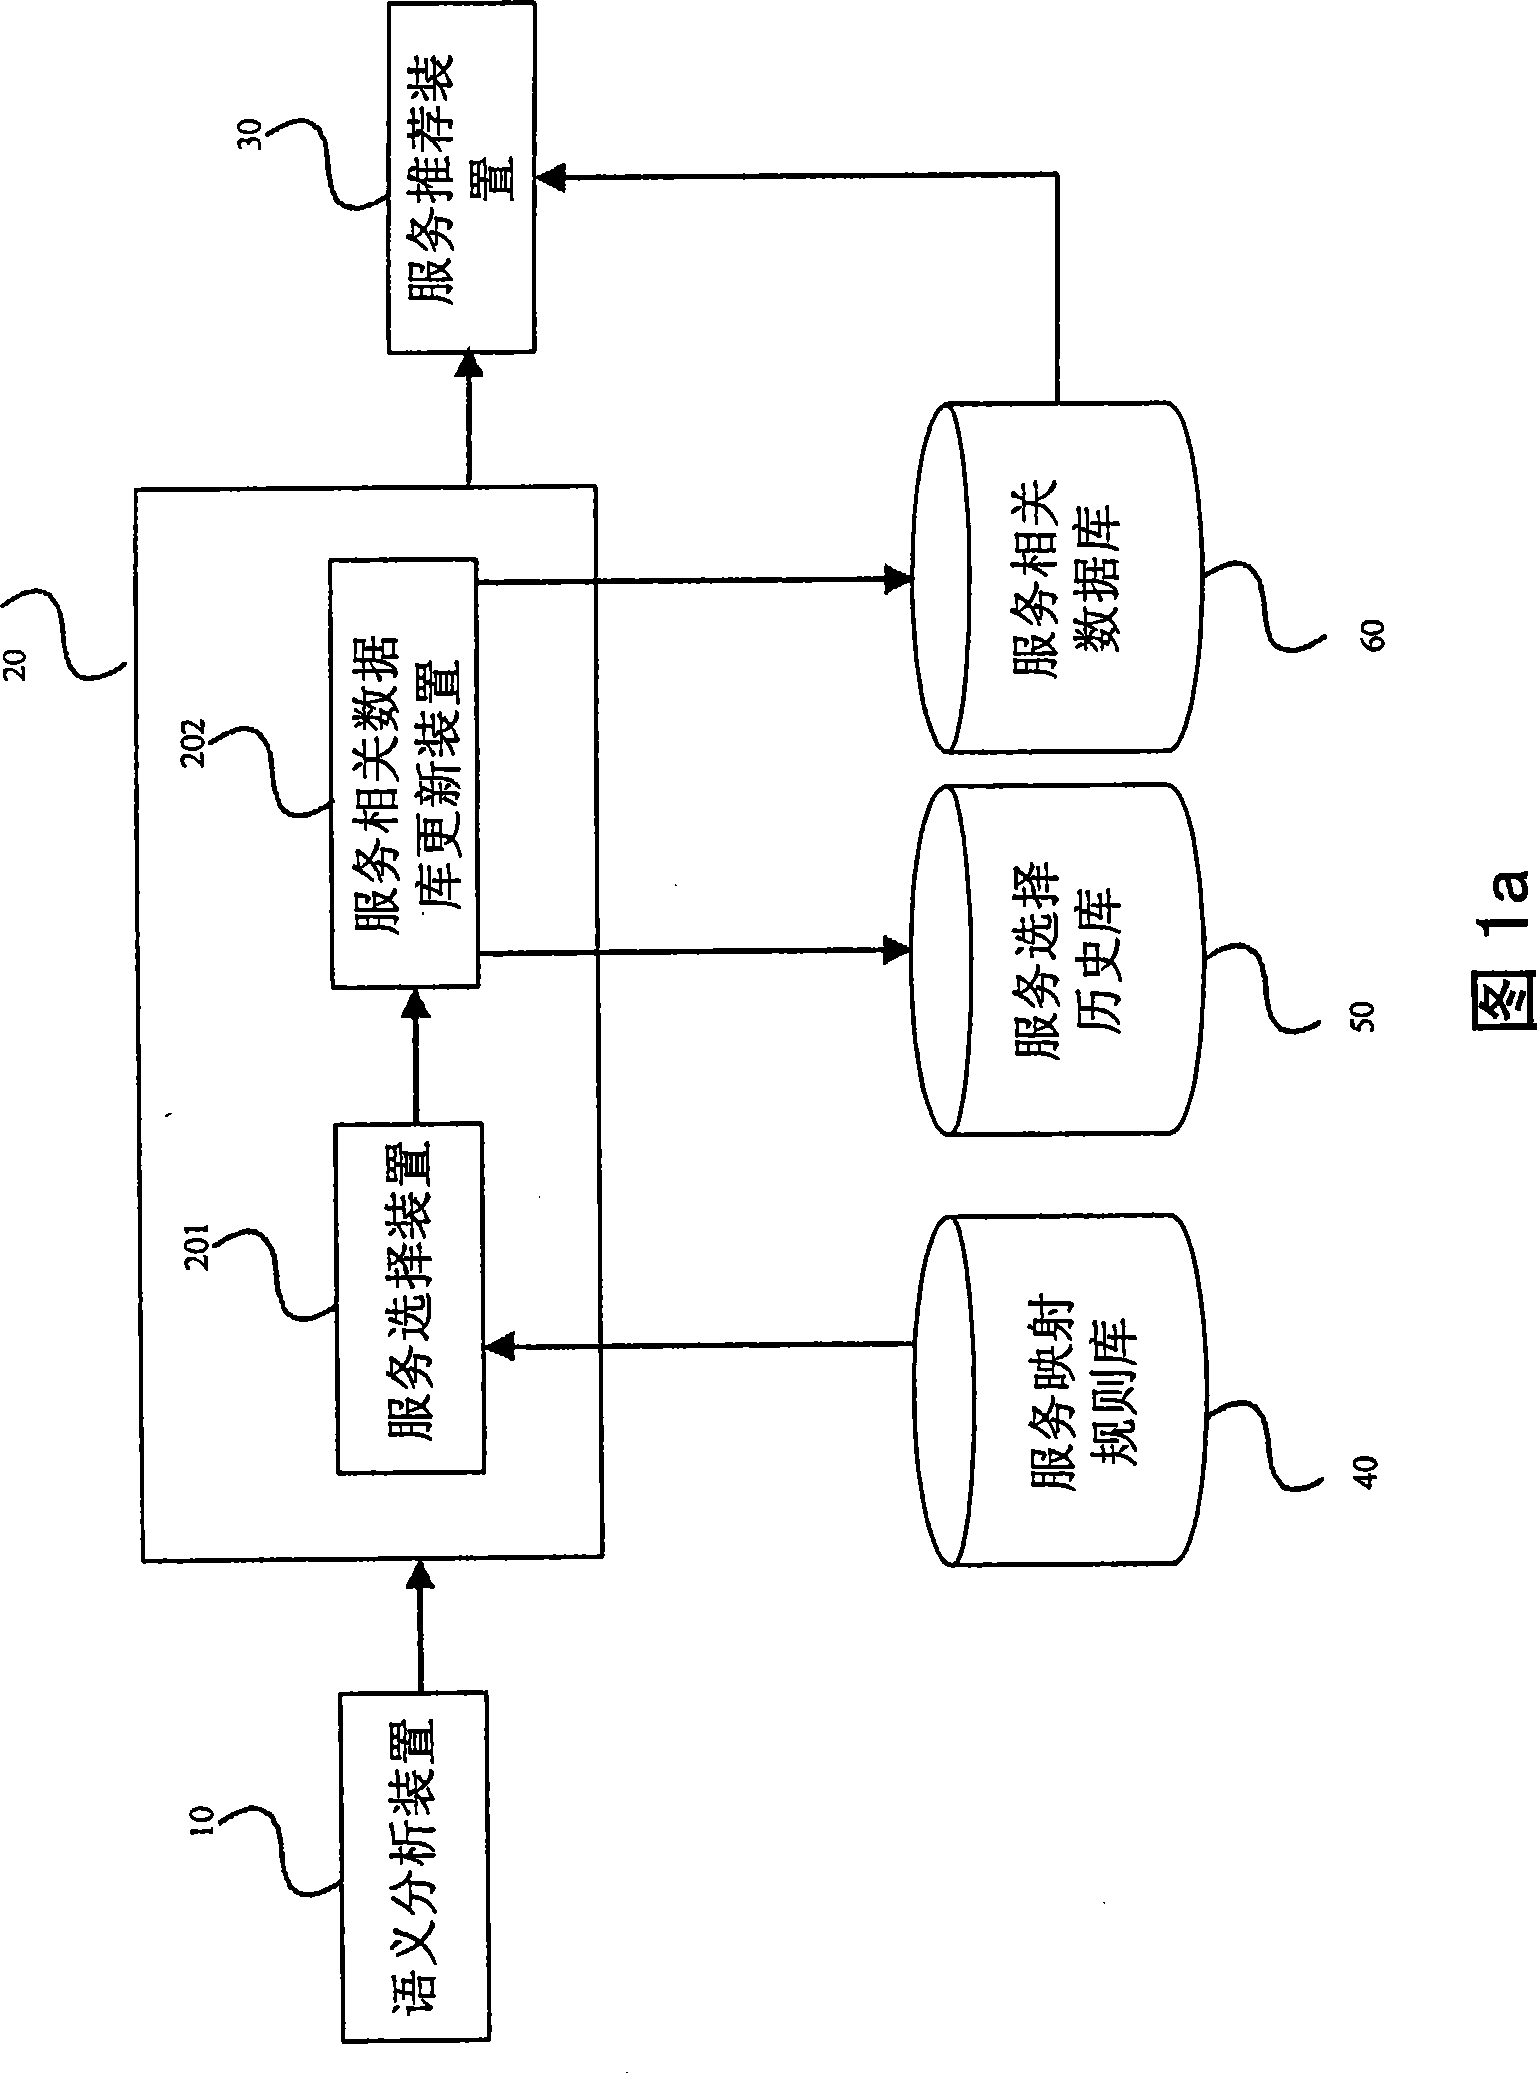 Self-adapting service recommendation equipment and method, self-adapting service recommendation system and method